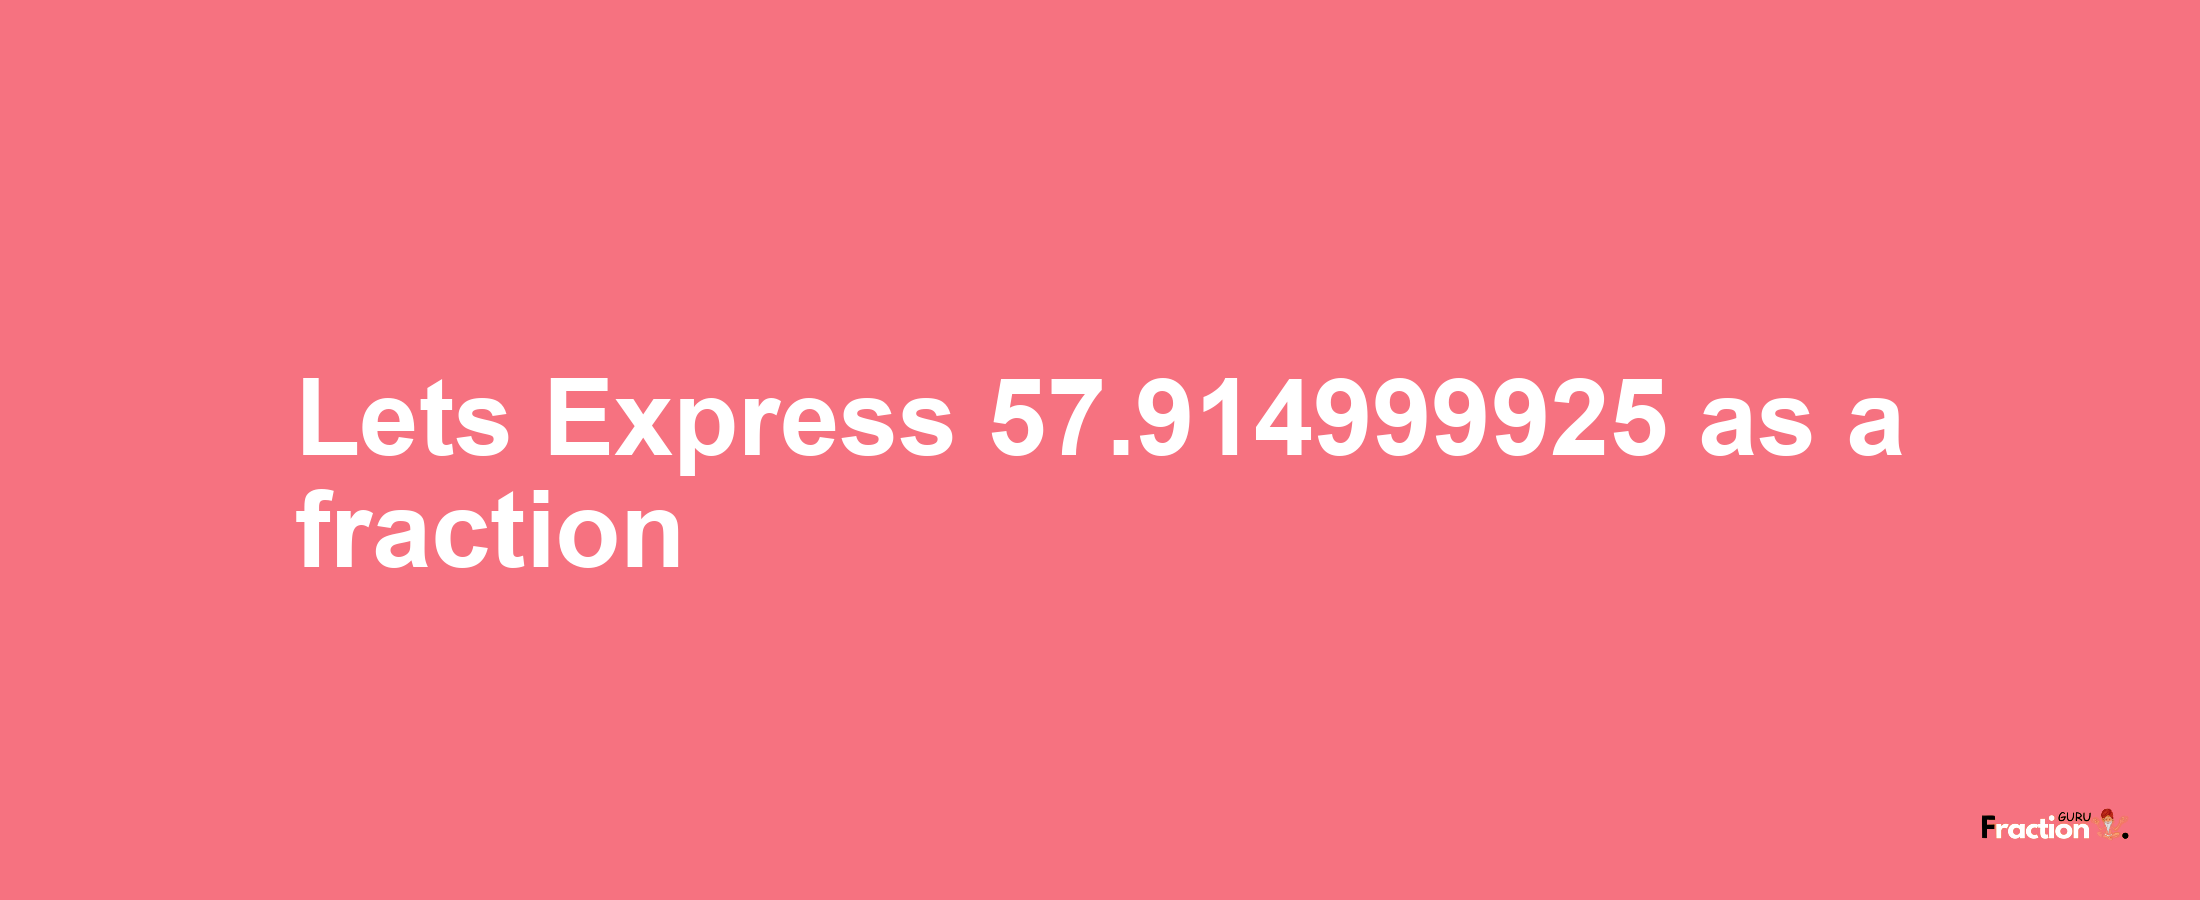 Lets Express 57.914999925 as afraction